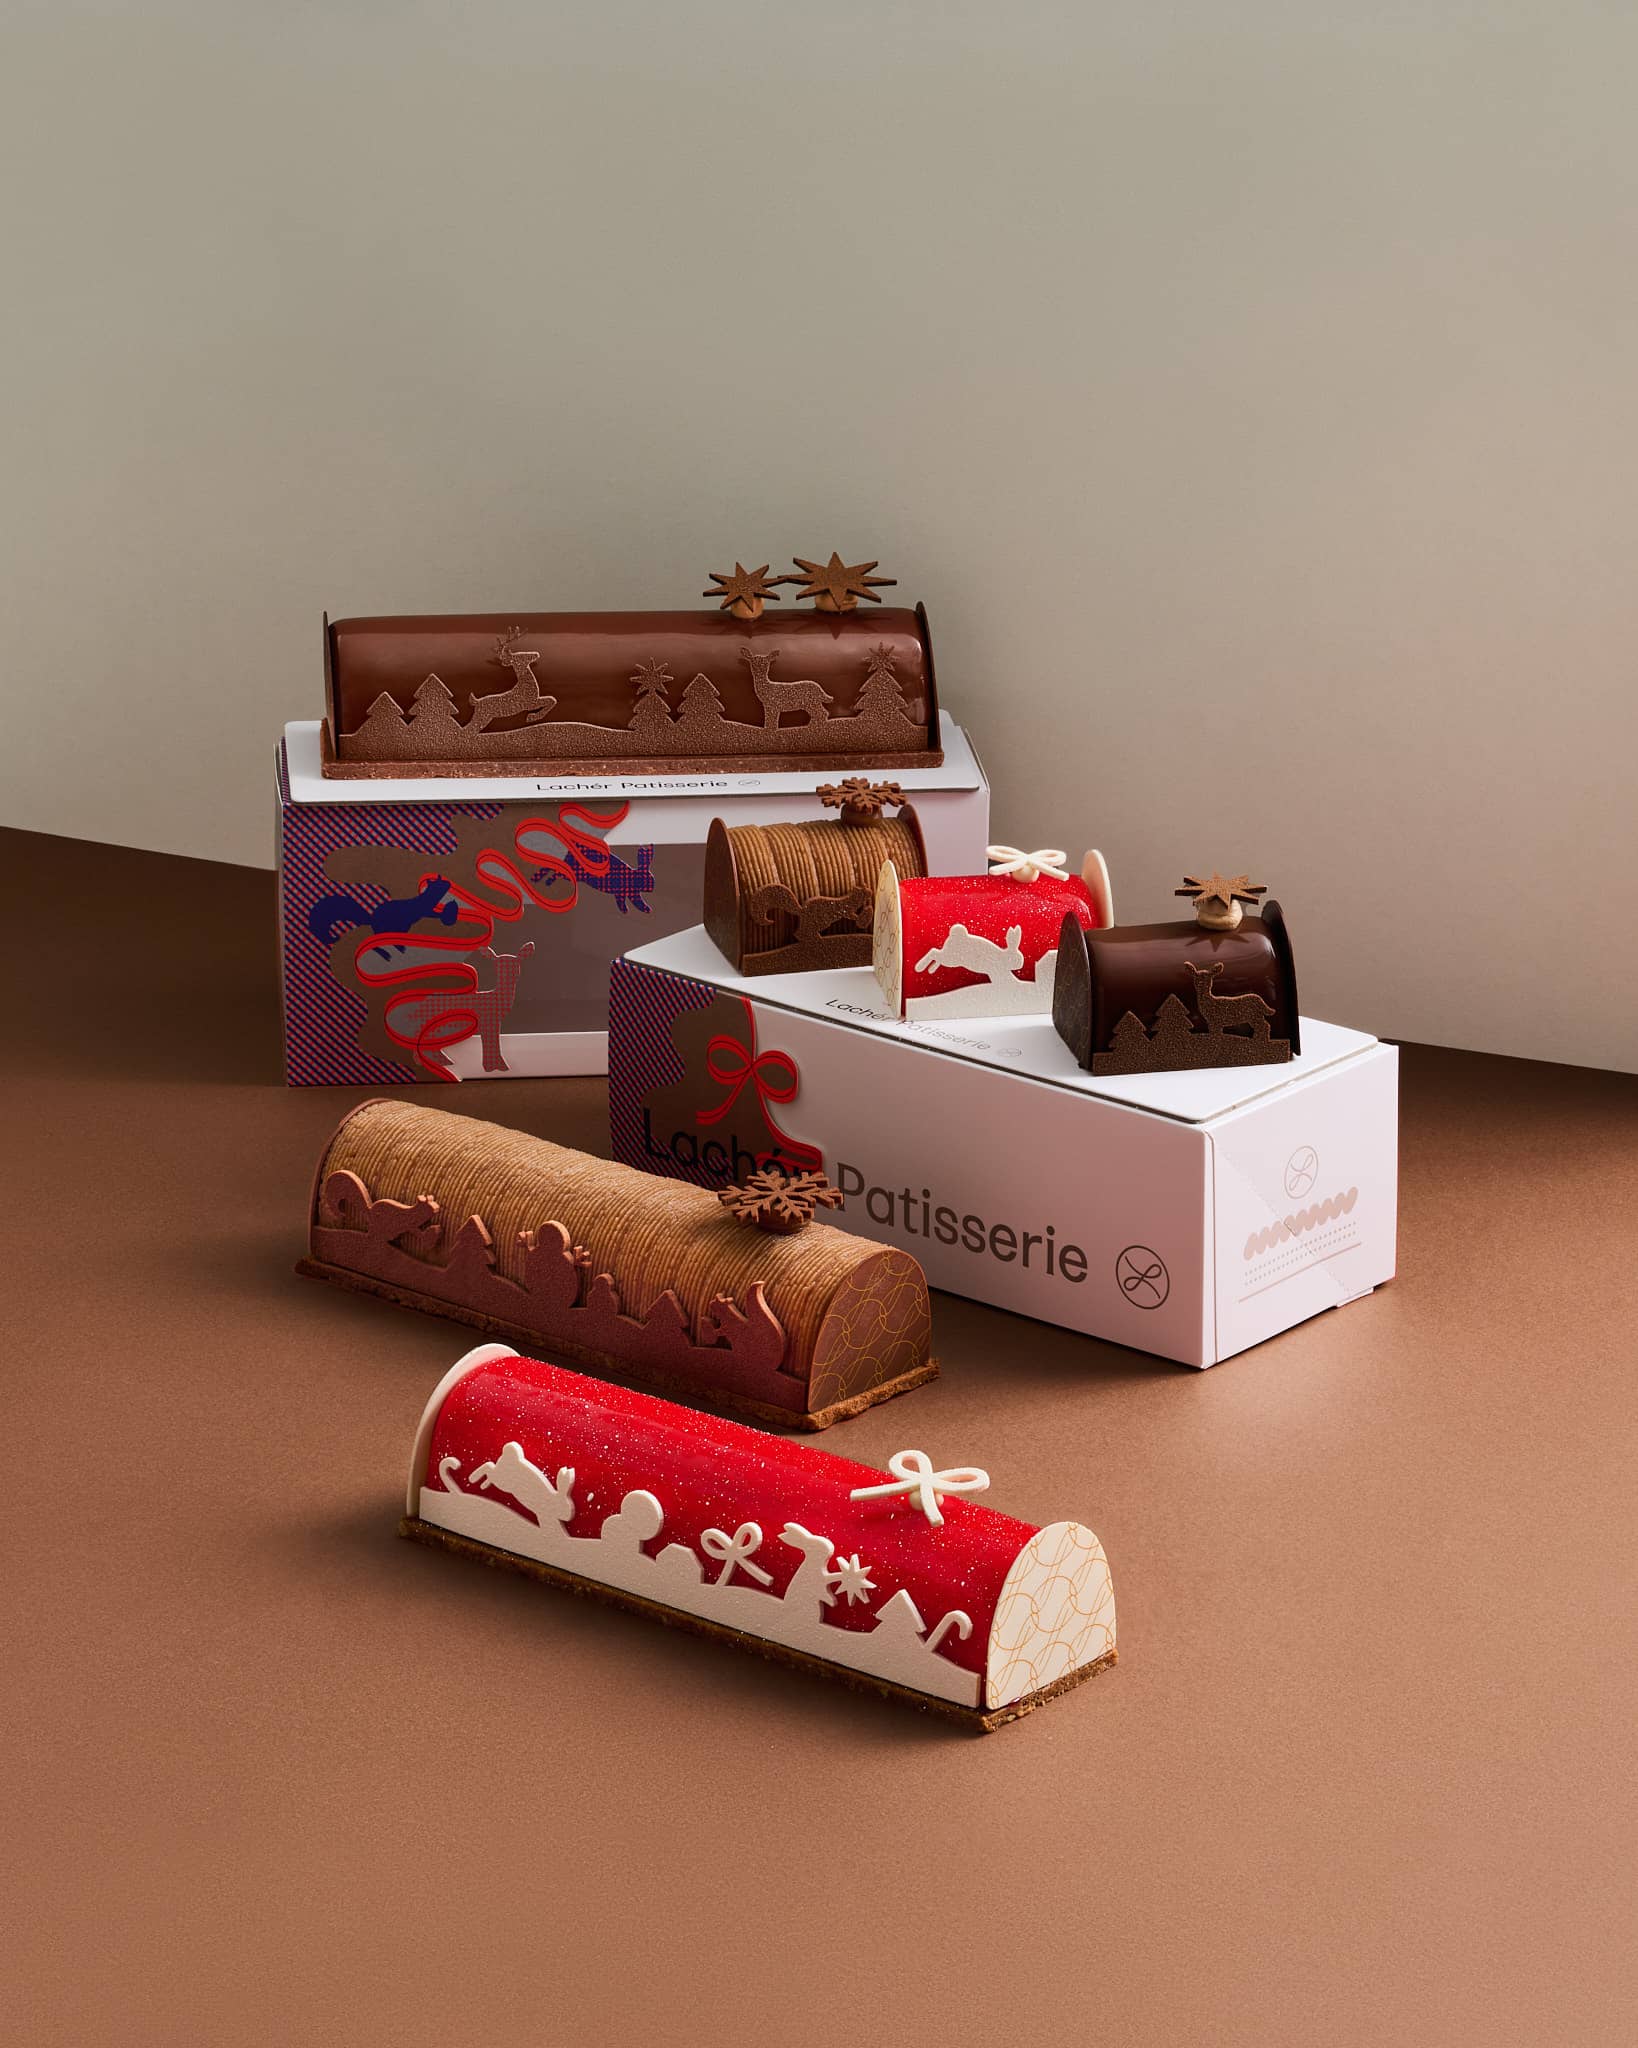 10 Reasons You Need Lachér Patisserie's Christmas Cake Delivery Now!